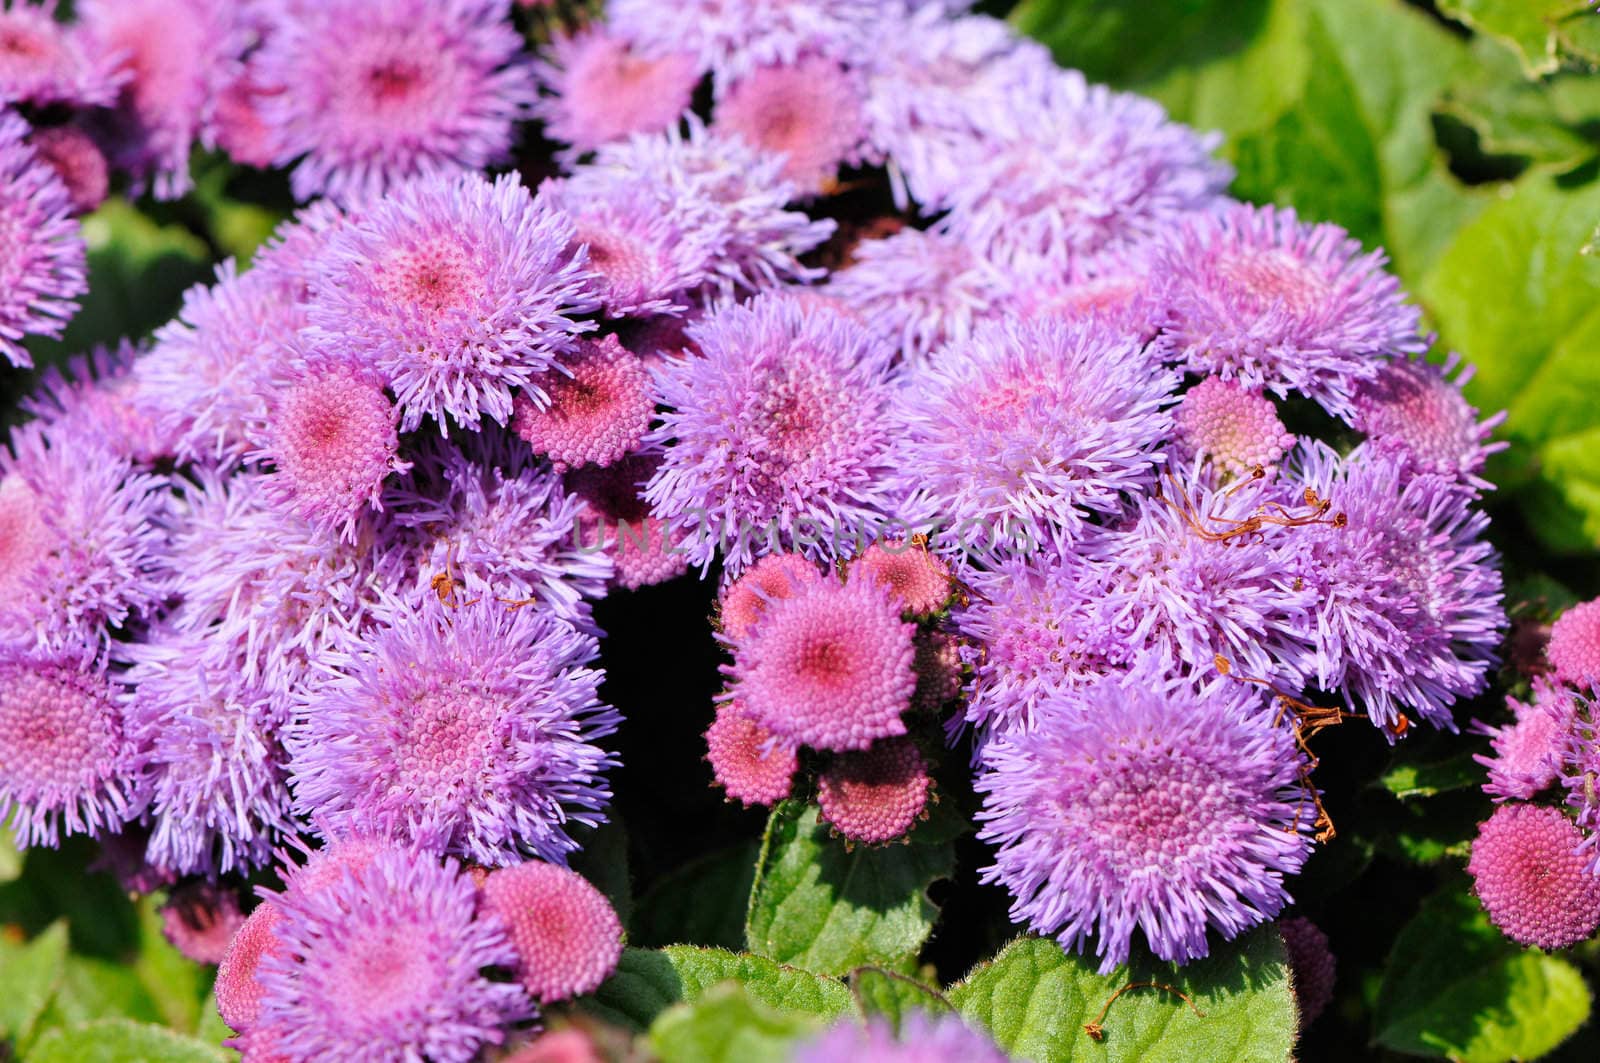 Bush of many purple and pink flowers with some green leafs